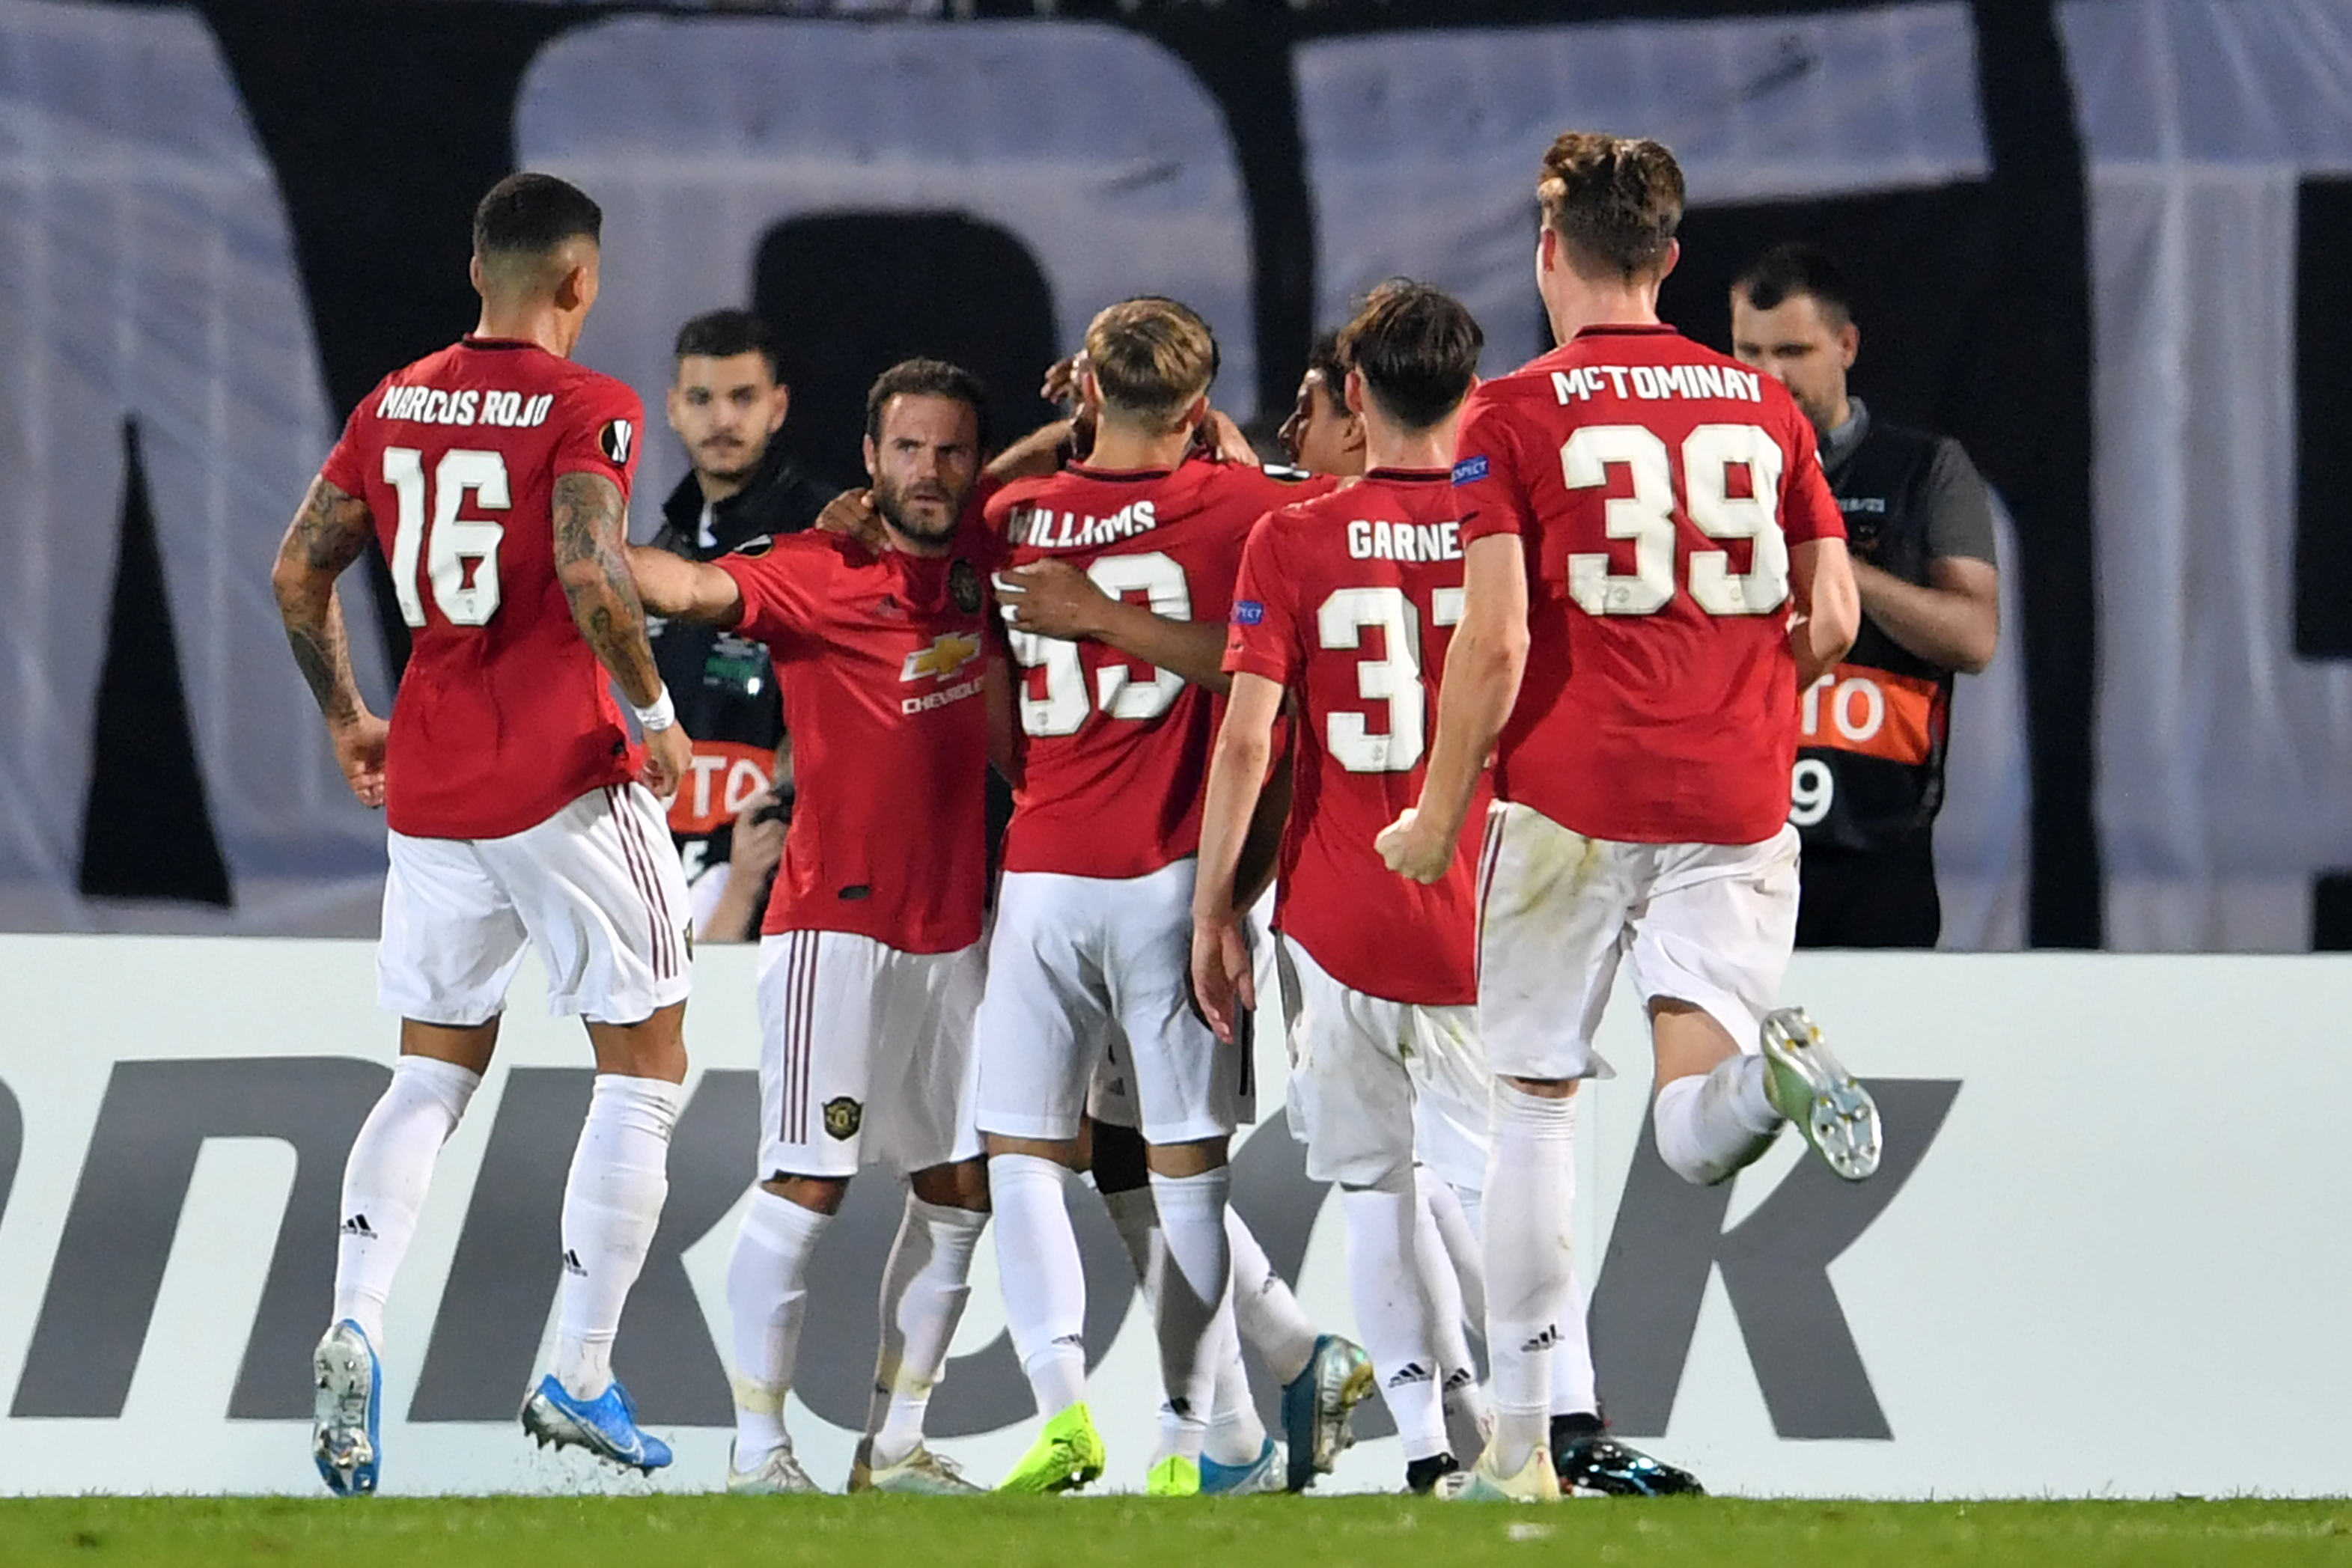 Manchester United's French striker Anthony Martial celebrates with teammates after he takes a penalty and scores his team's first goalcpast FK Partizan's Serbian goalkeeper Vladimir Stojkovic during the UEFA Europa league group L football match between Partizan Belgrade and Manchester United at the Partizan stadium in Belgrade on October 24, 2019. (Photo by ANDREJ ISAKOVIC / AFP) (Photo by ANDREJ ISAKOVIC/AFP via Getty Images)